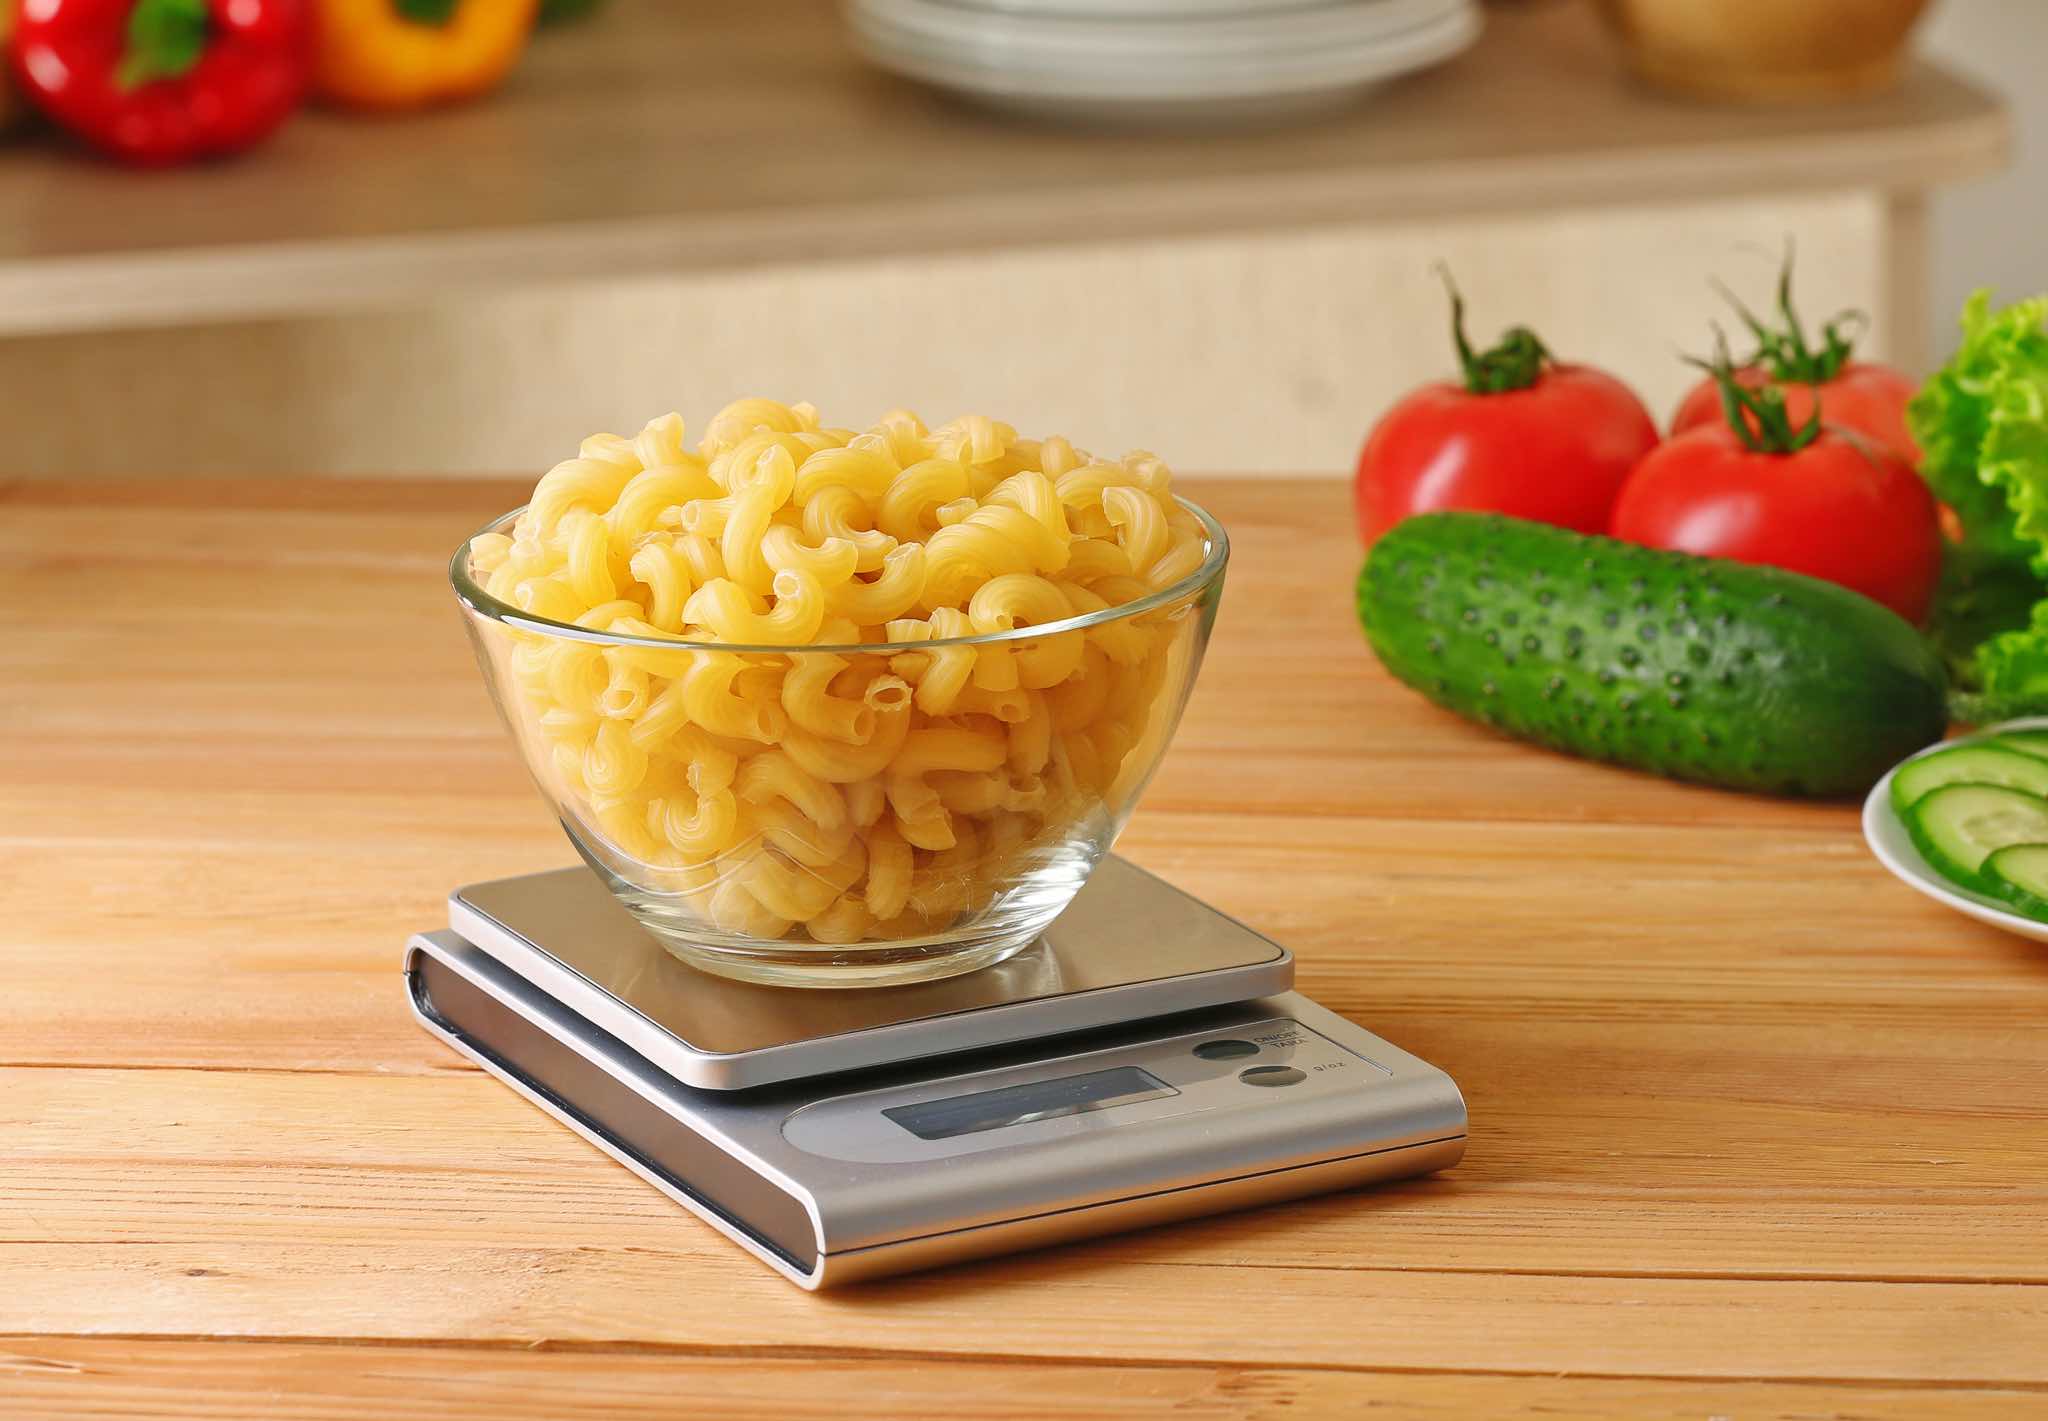 How much macaroni do you cook per person?